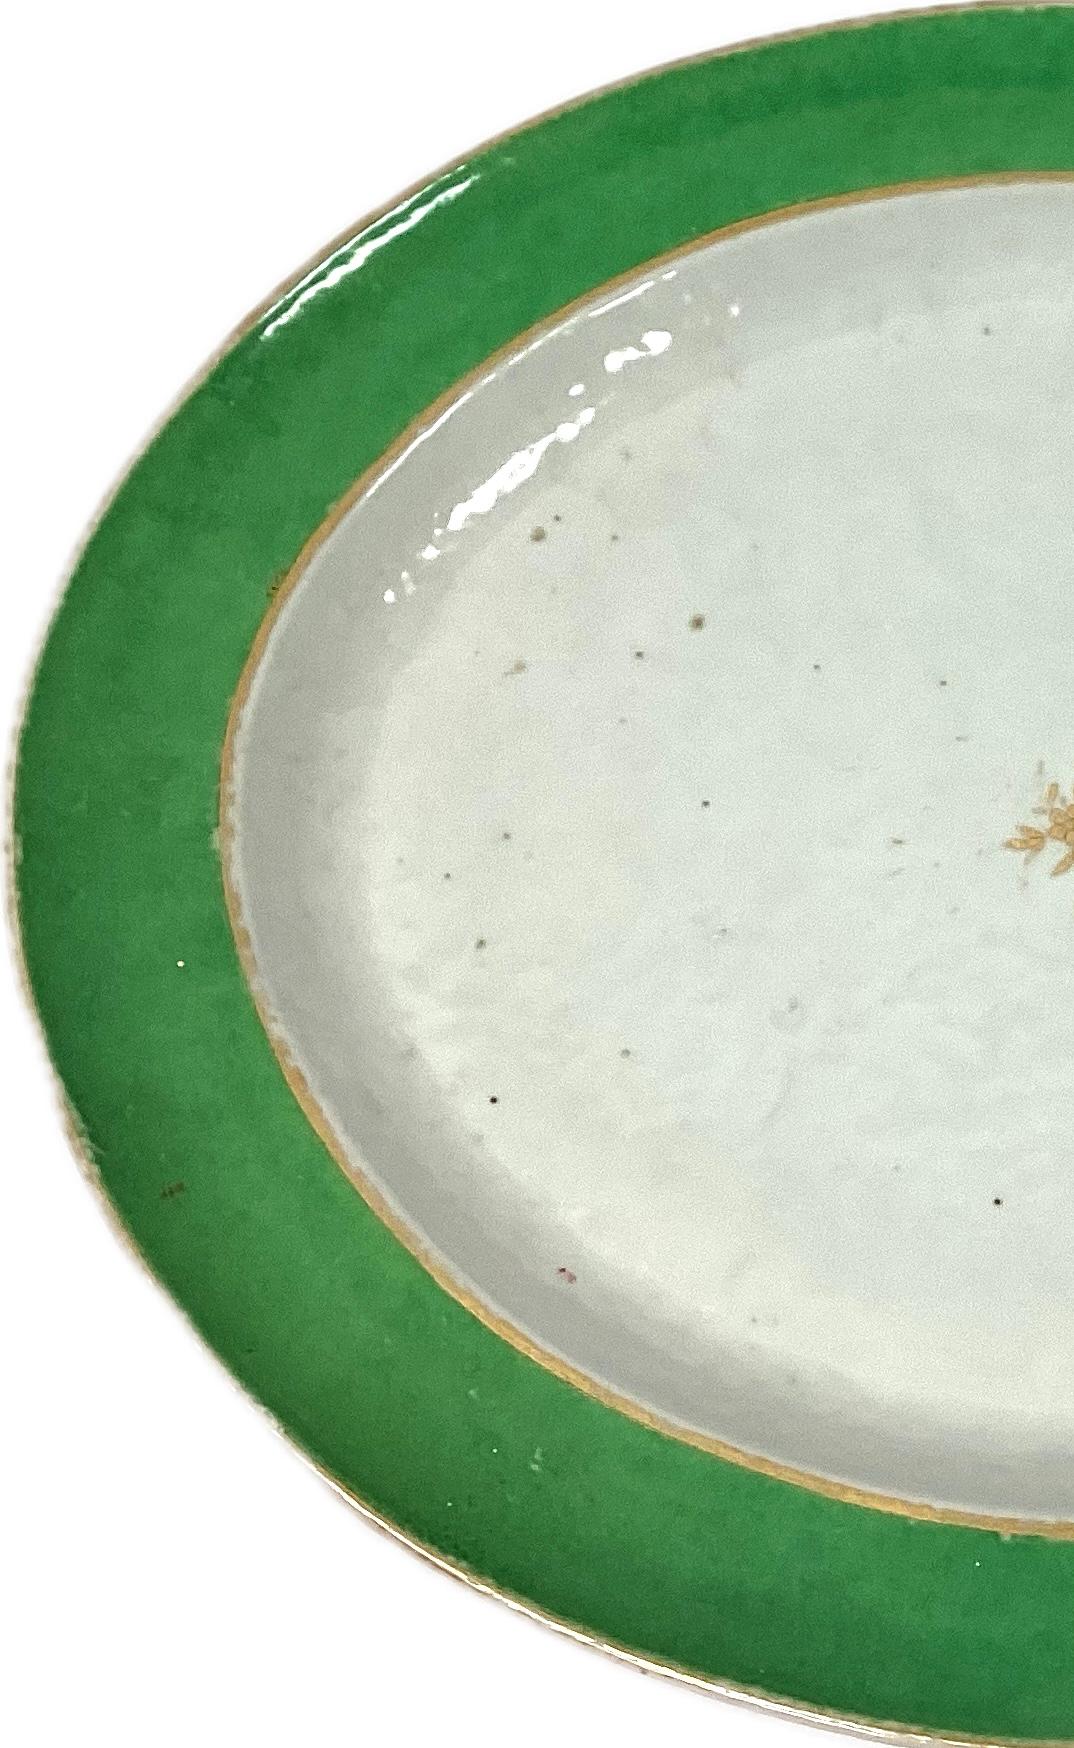 Rare 18th century Chinese Export serving platter. Platter is white with wide green border and gold trim.  Gold accent floral design in center. Platter is very large and would continue to make a great piece of serve ware or could be used as part of